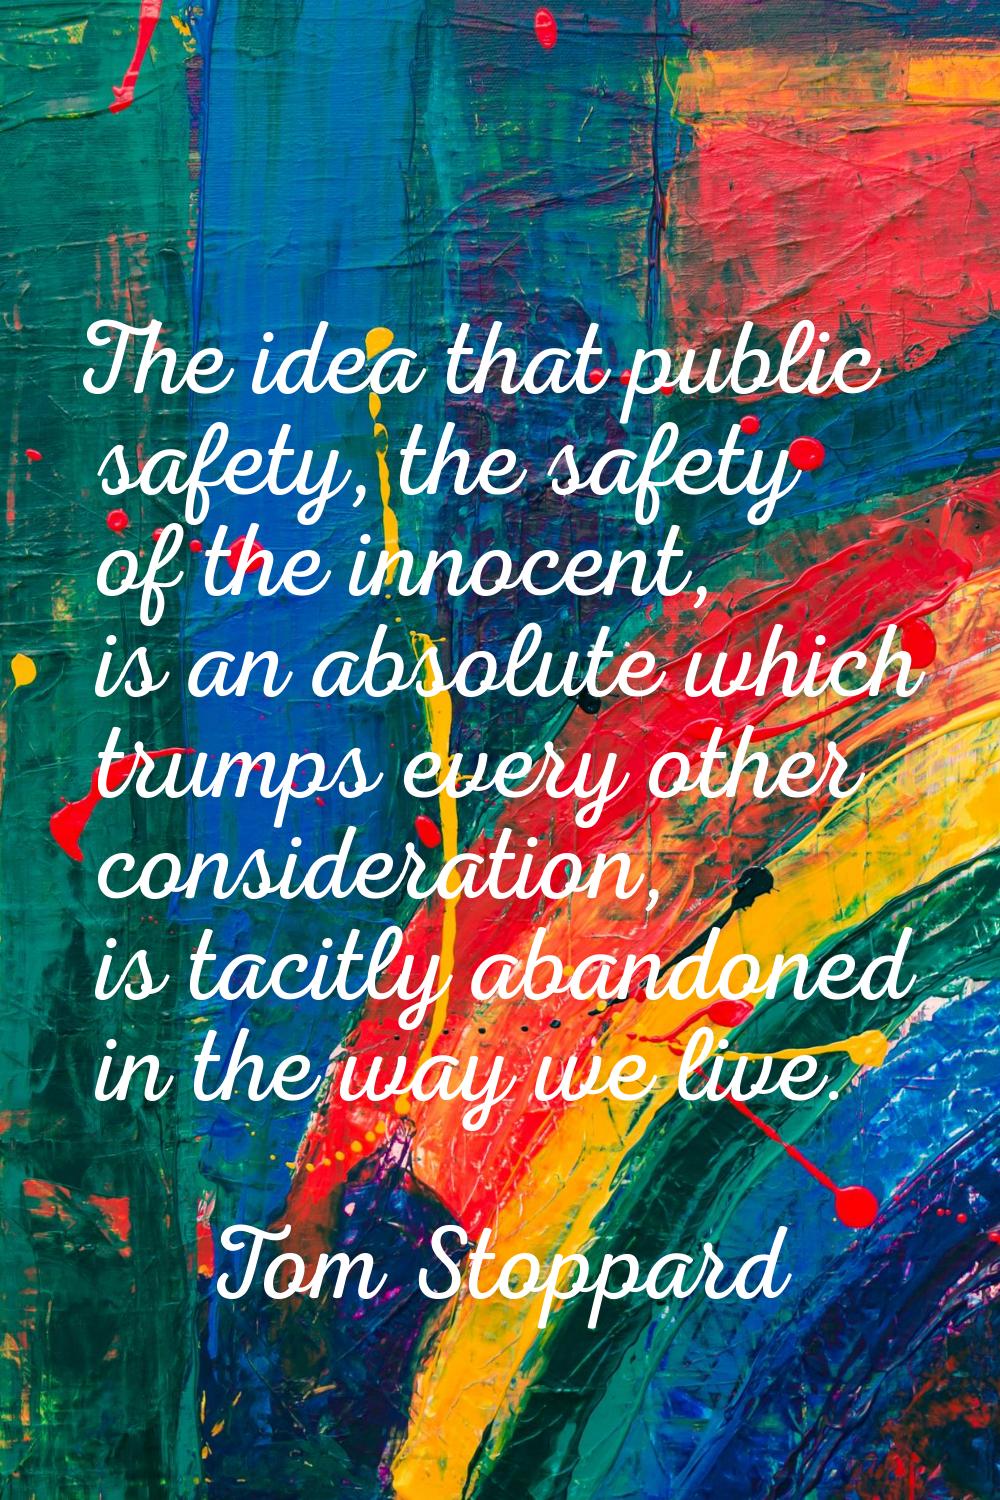 The idea that public safety, the safety of the innocent, is an absolute which trumps every other co